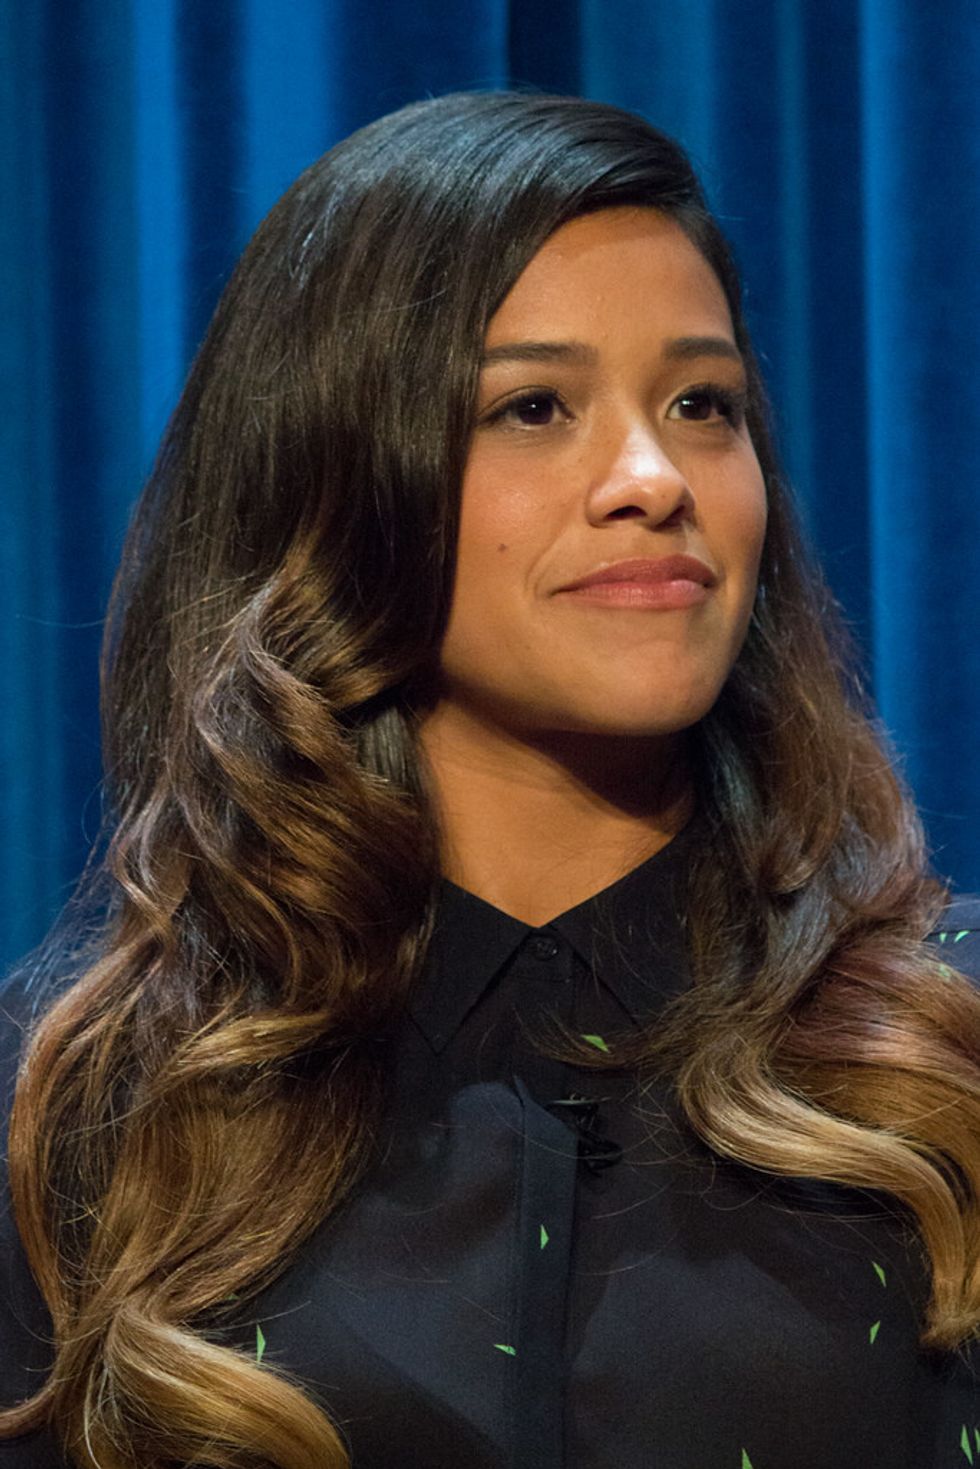 Jane the Virgin Star, Gina Rodriguez, is under fire for using the N-word on her Instagram